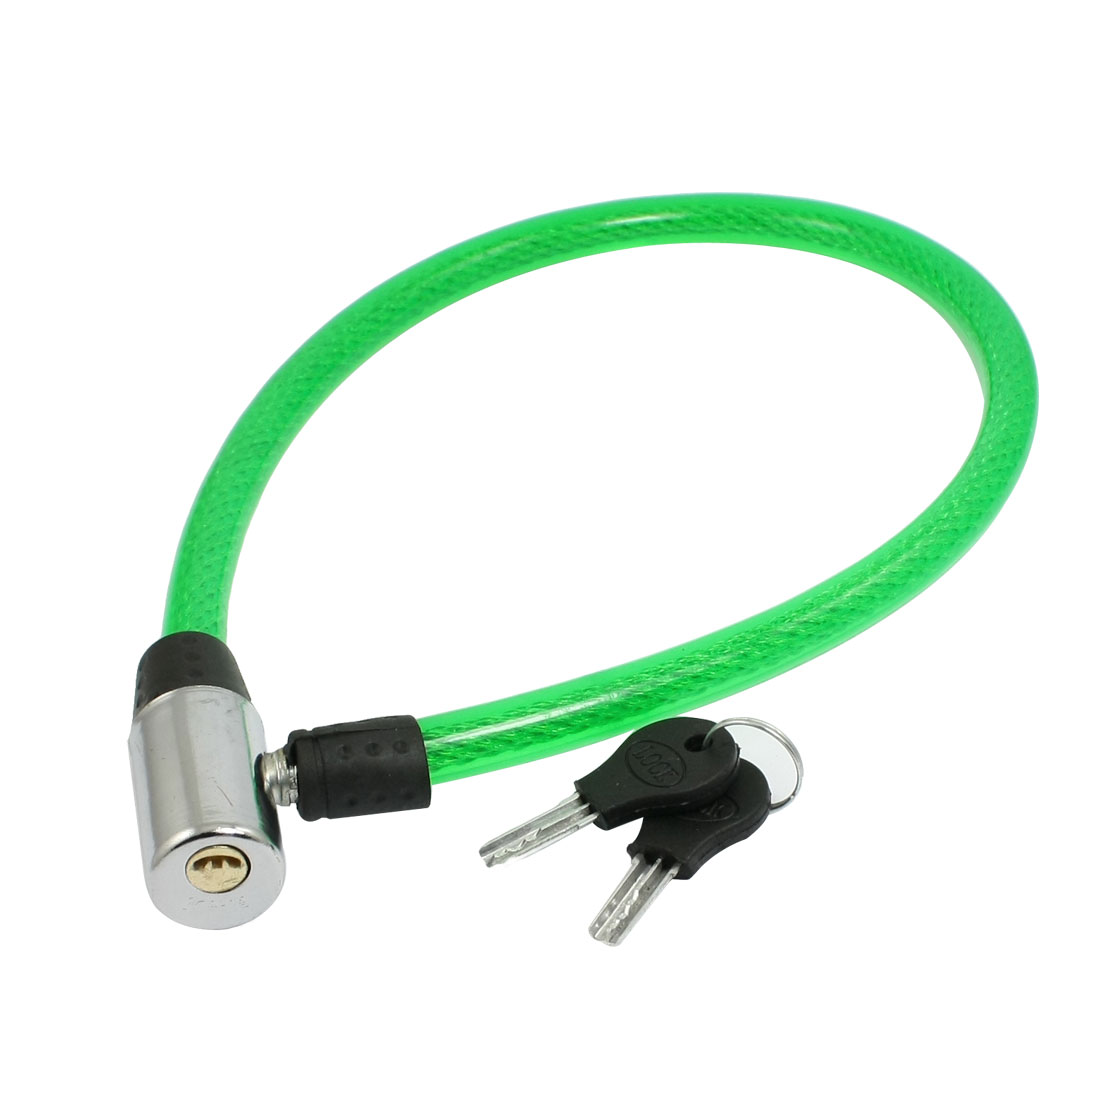 Unique Bargains Durable 24.4" Flexible Cable Bike Bicycle Security Safeguard Lock w 2 keys Green